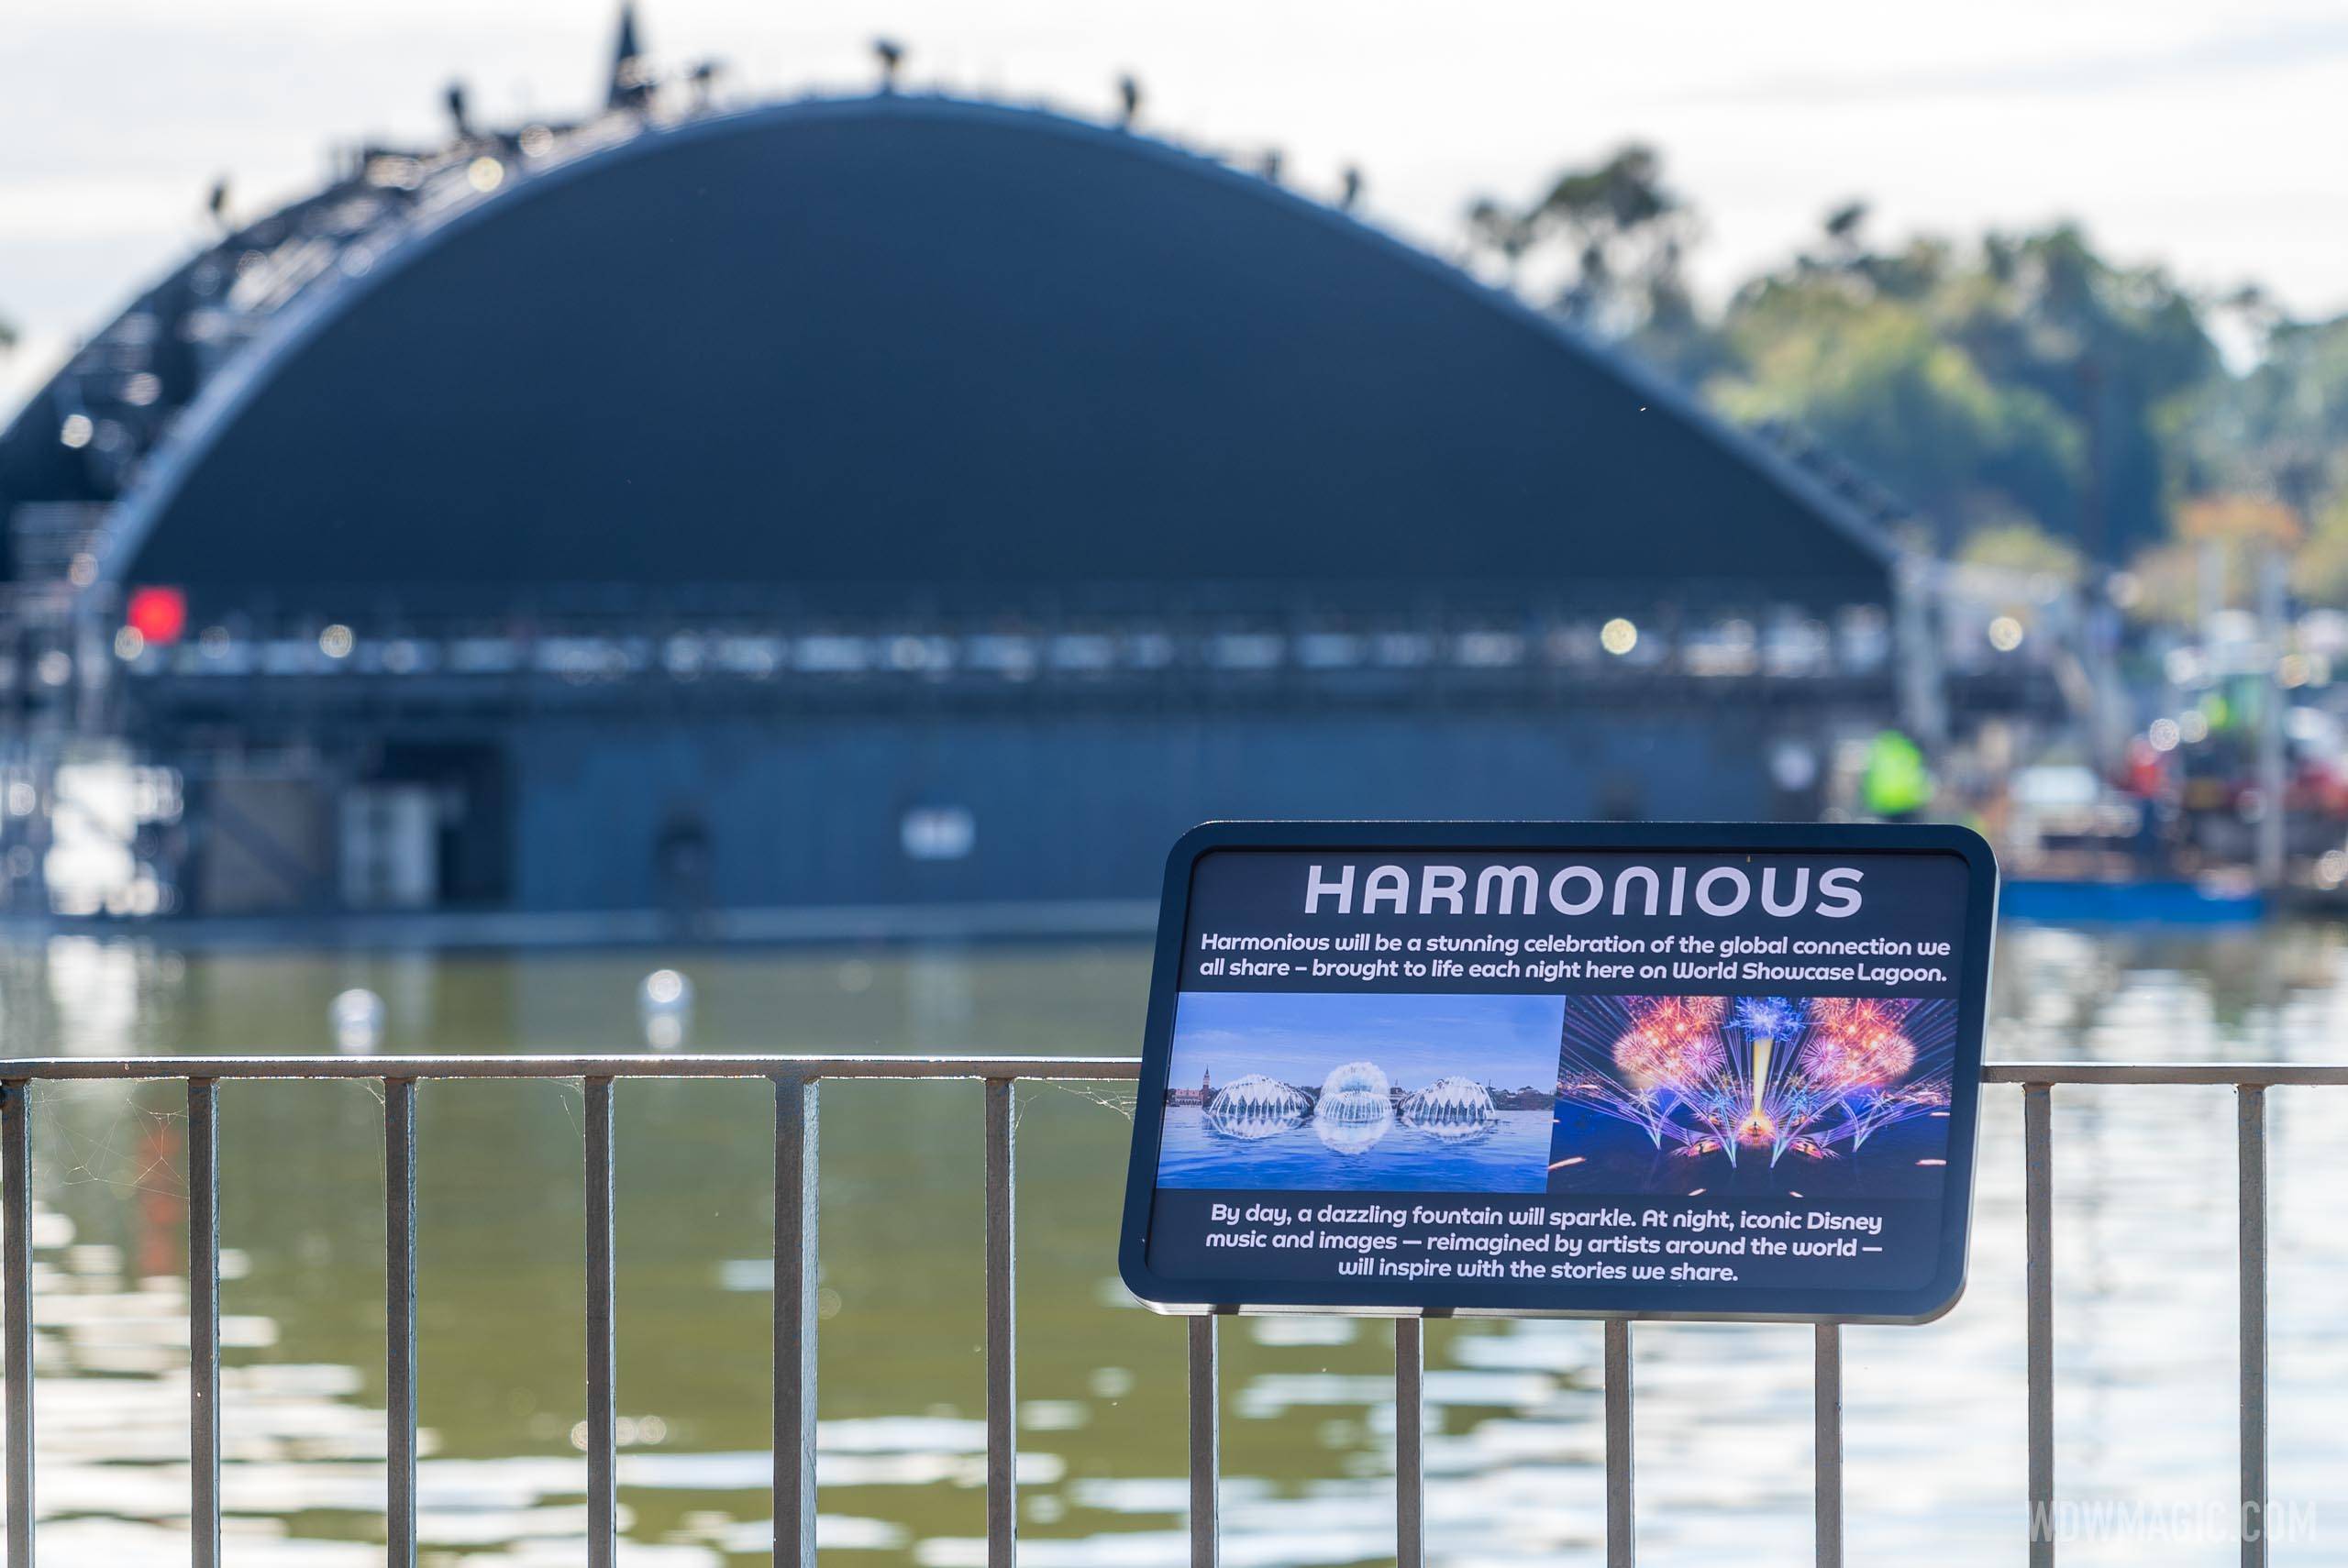 PHOTOS - Harmonious signage and concept art now on display in World Showcase Plaza